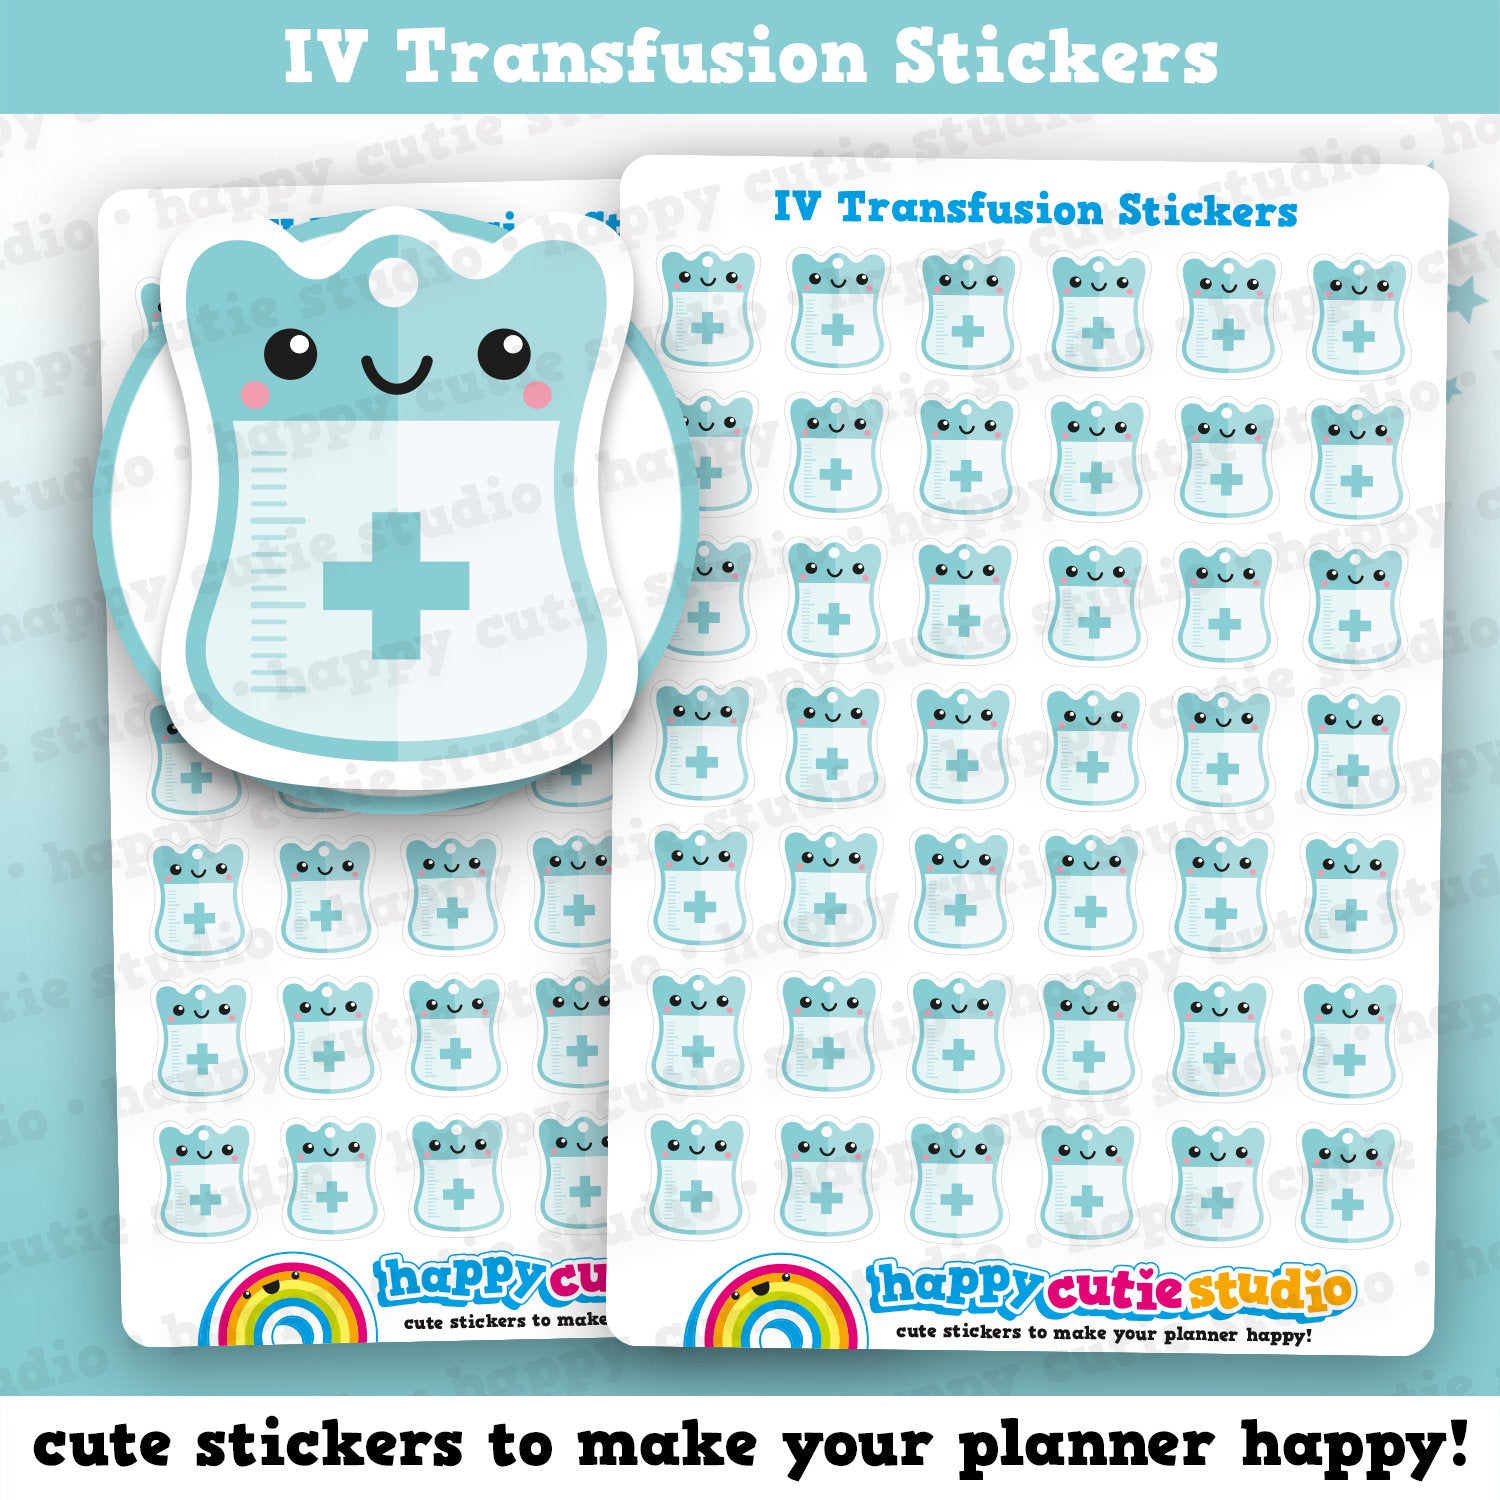 42 Cute IV Transfusion Reminder Planner Stickers